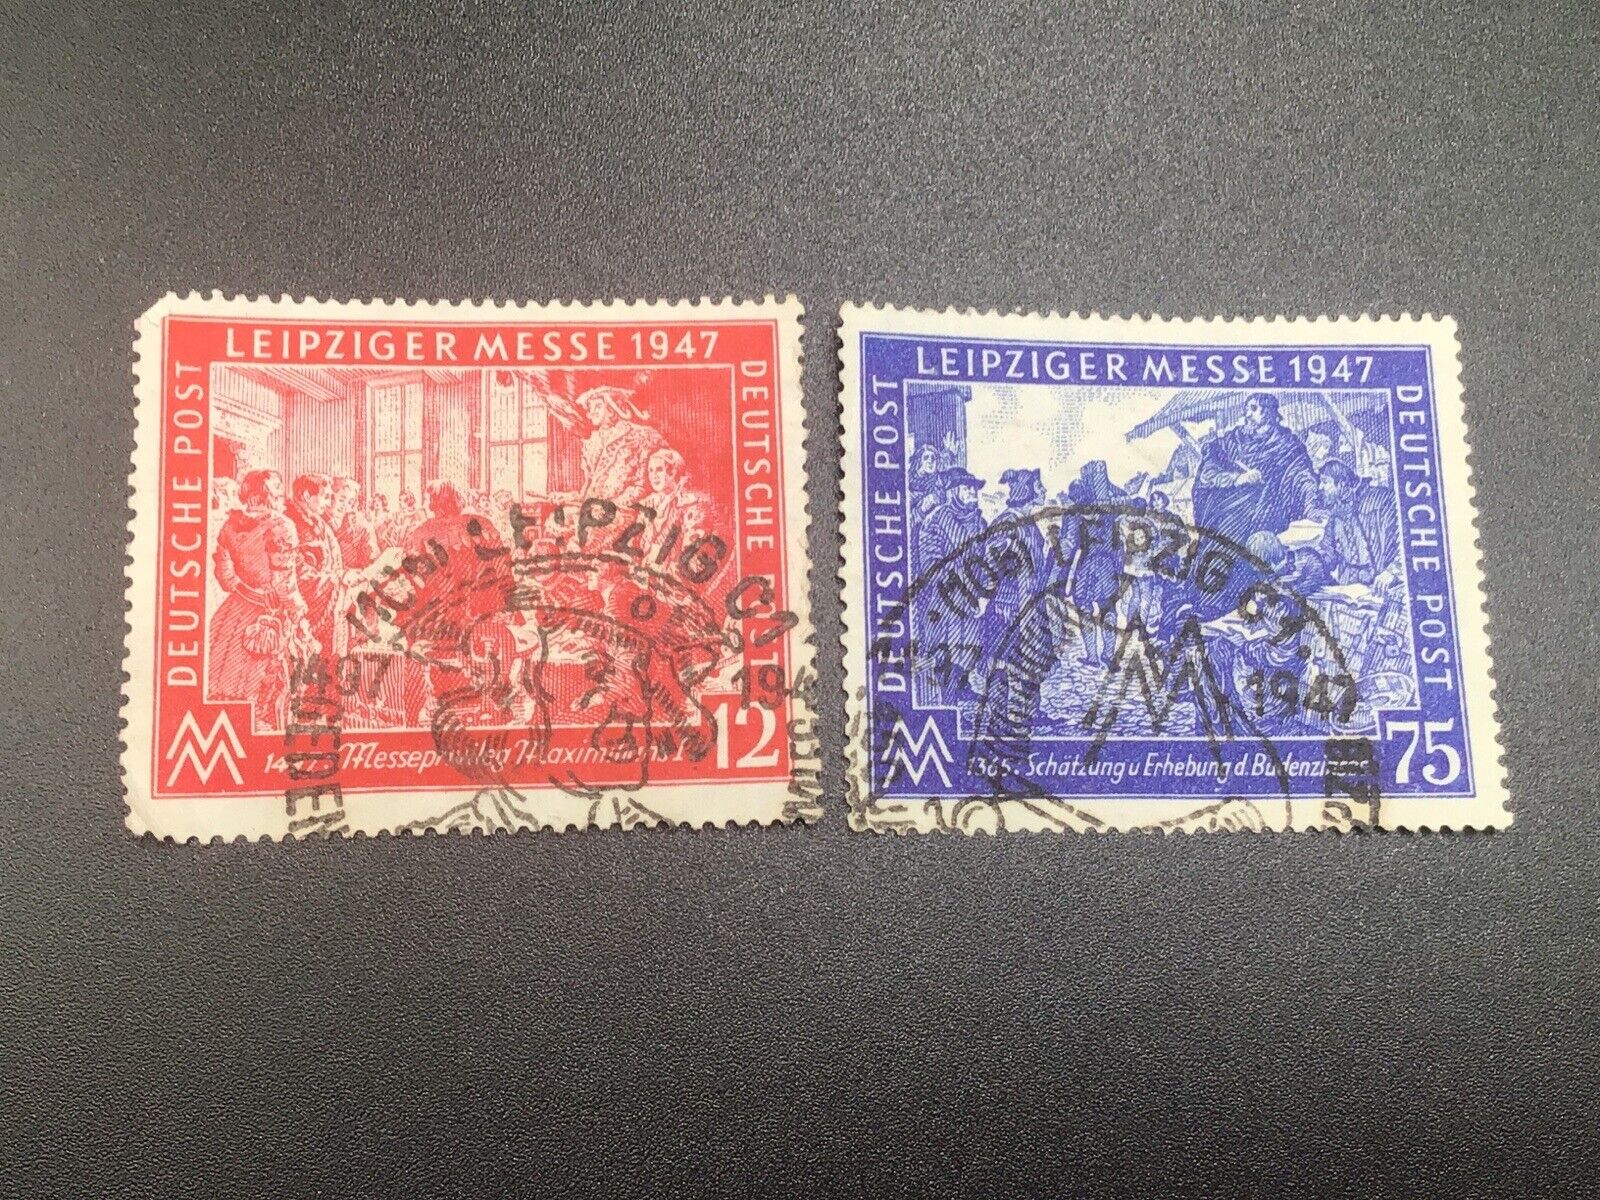 Germany 1947 Leipzig auction fair 12pf red & 75pf blue used.  P170